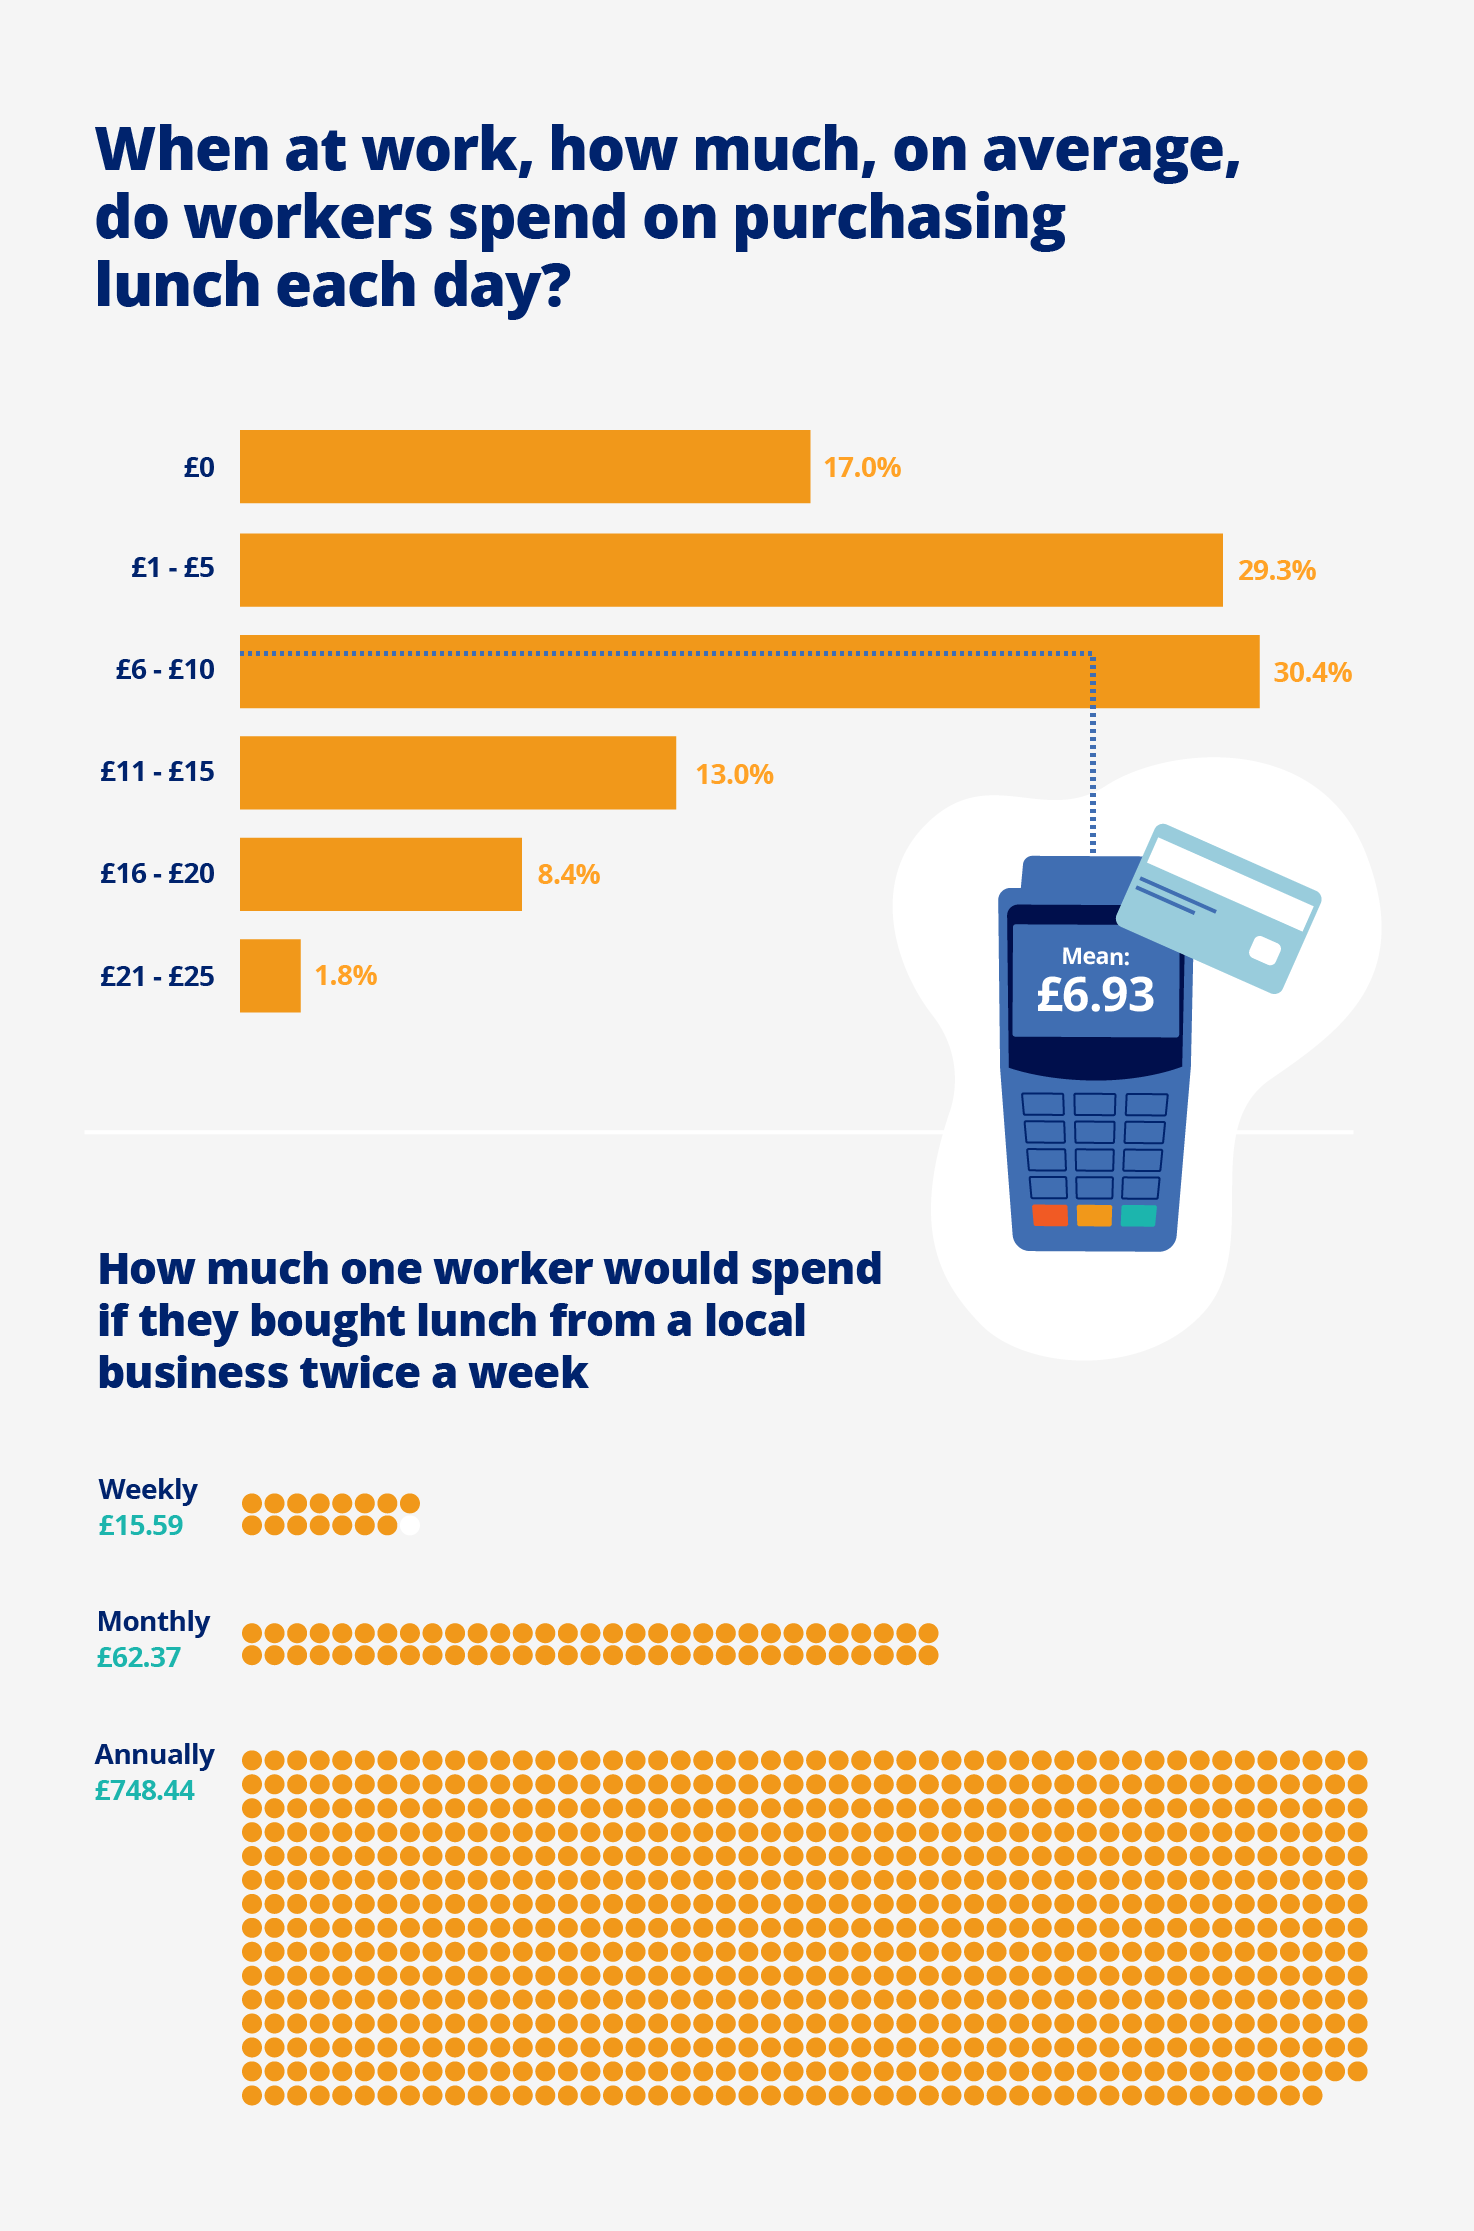 How much do workers spend on lunch each day